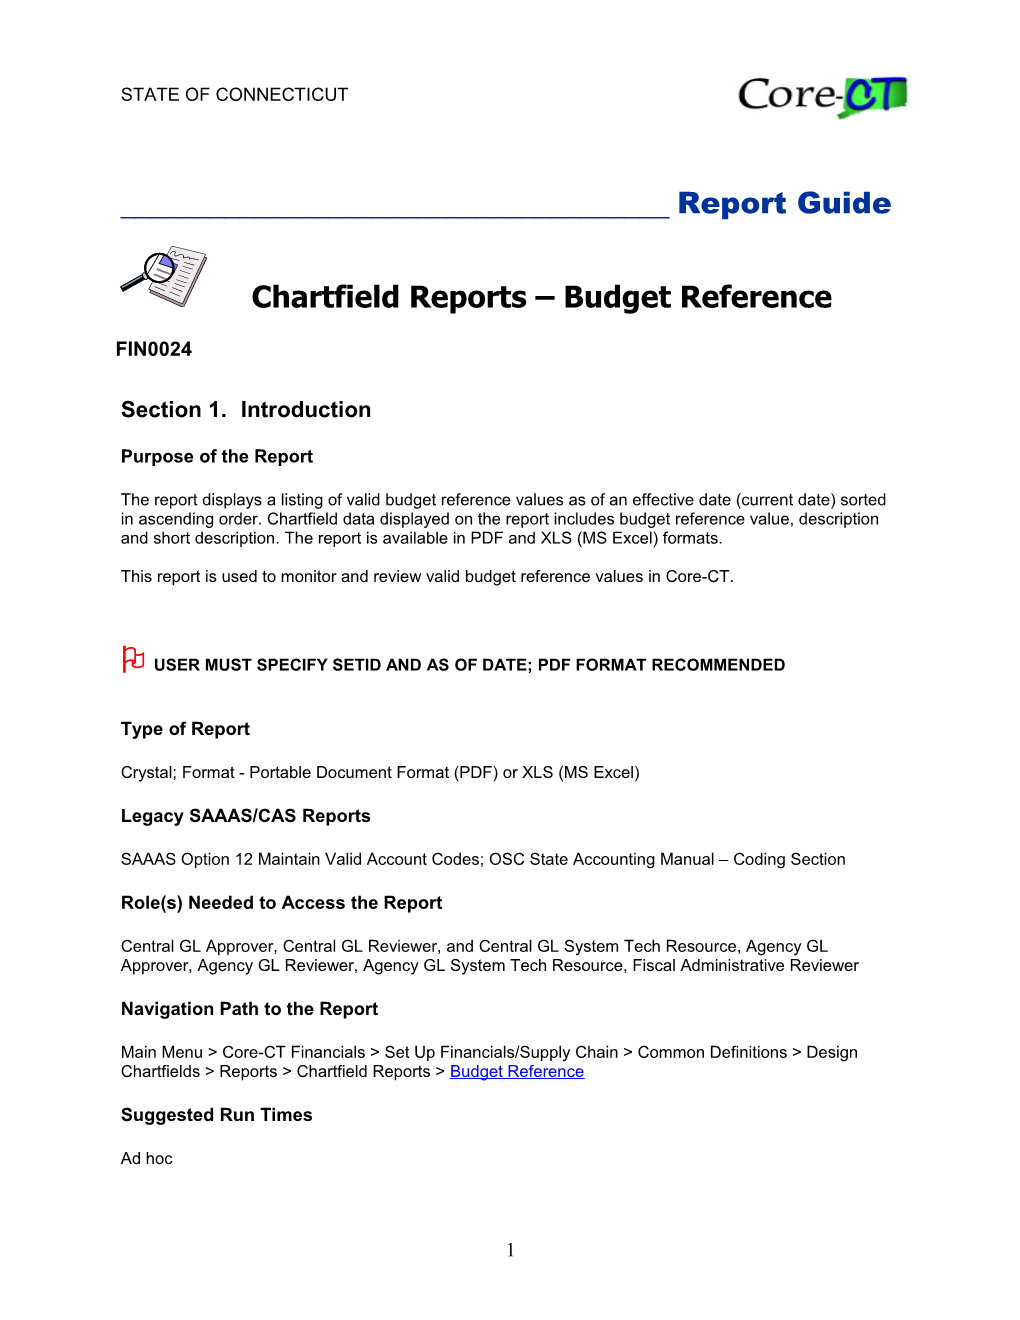 Chartfield Reports-Budget Reference (FIN0024)